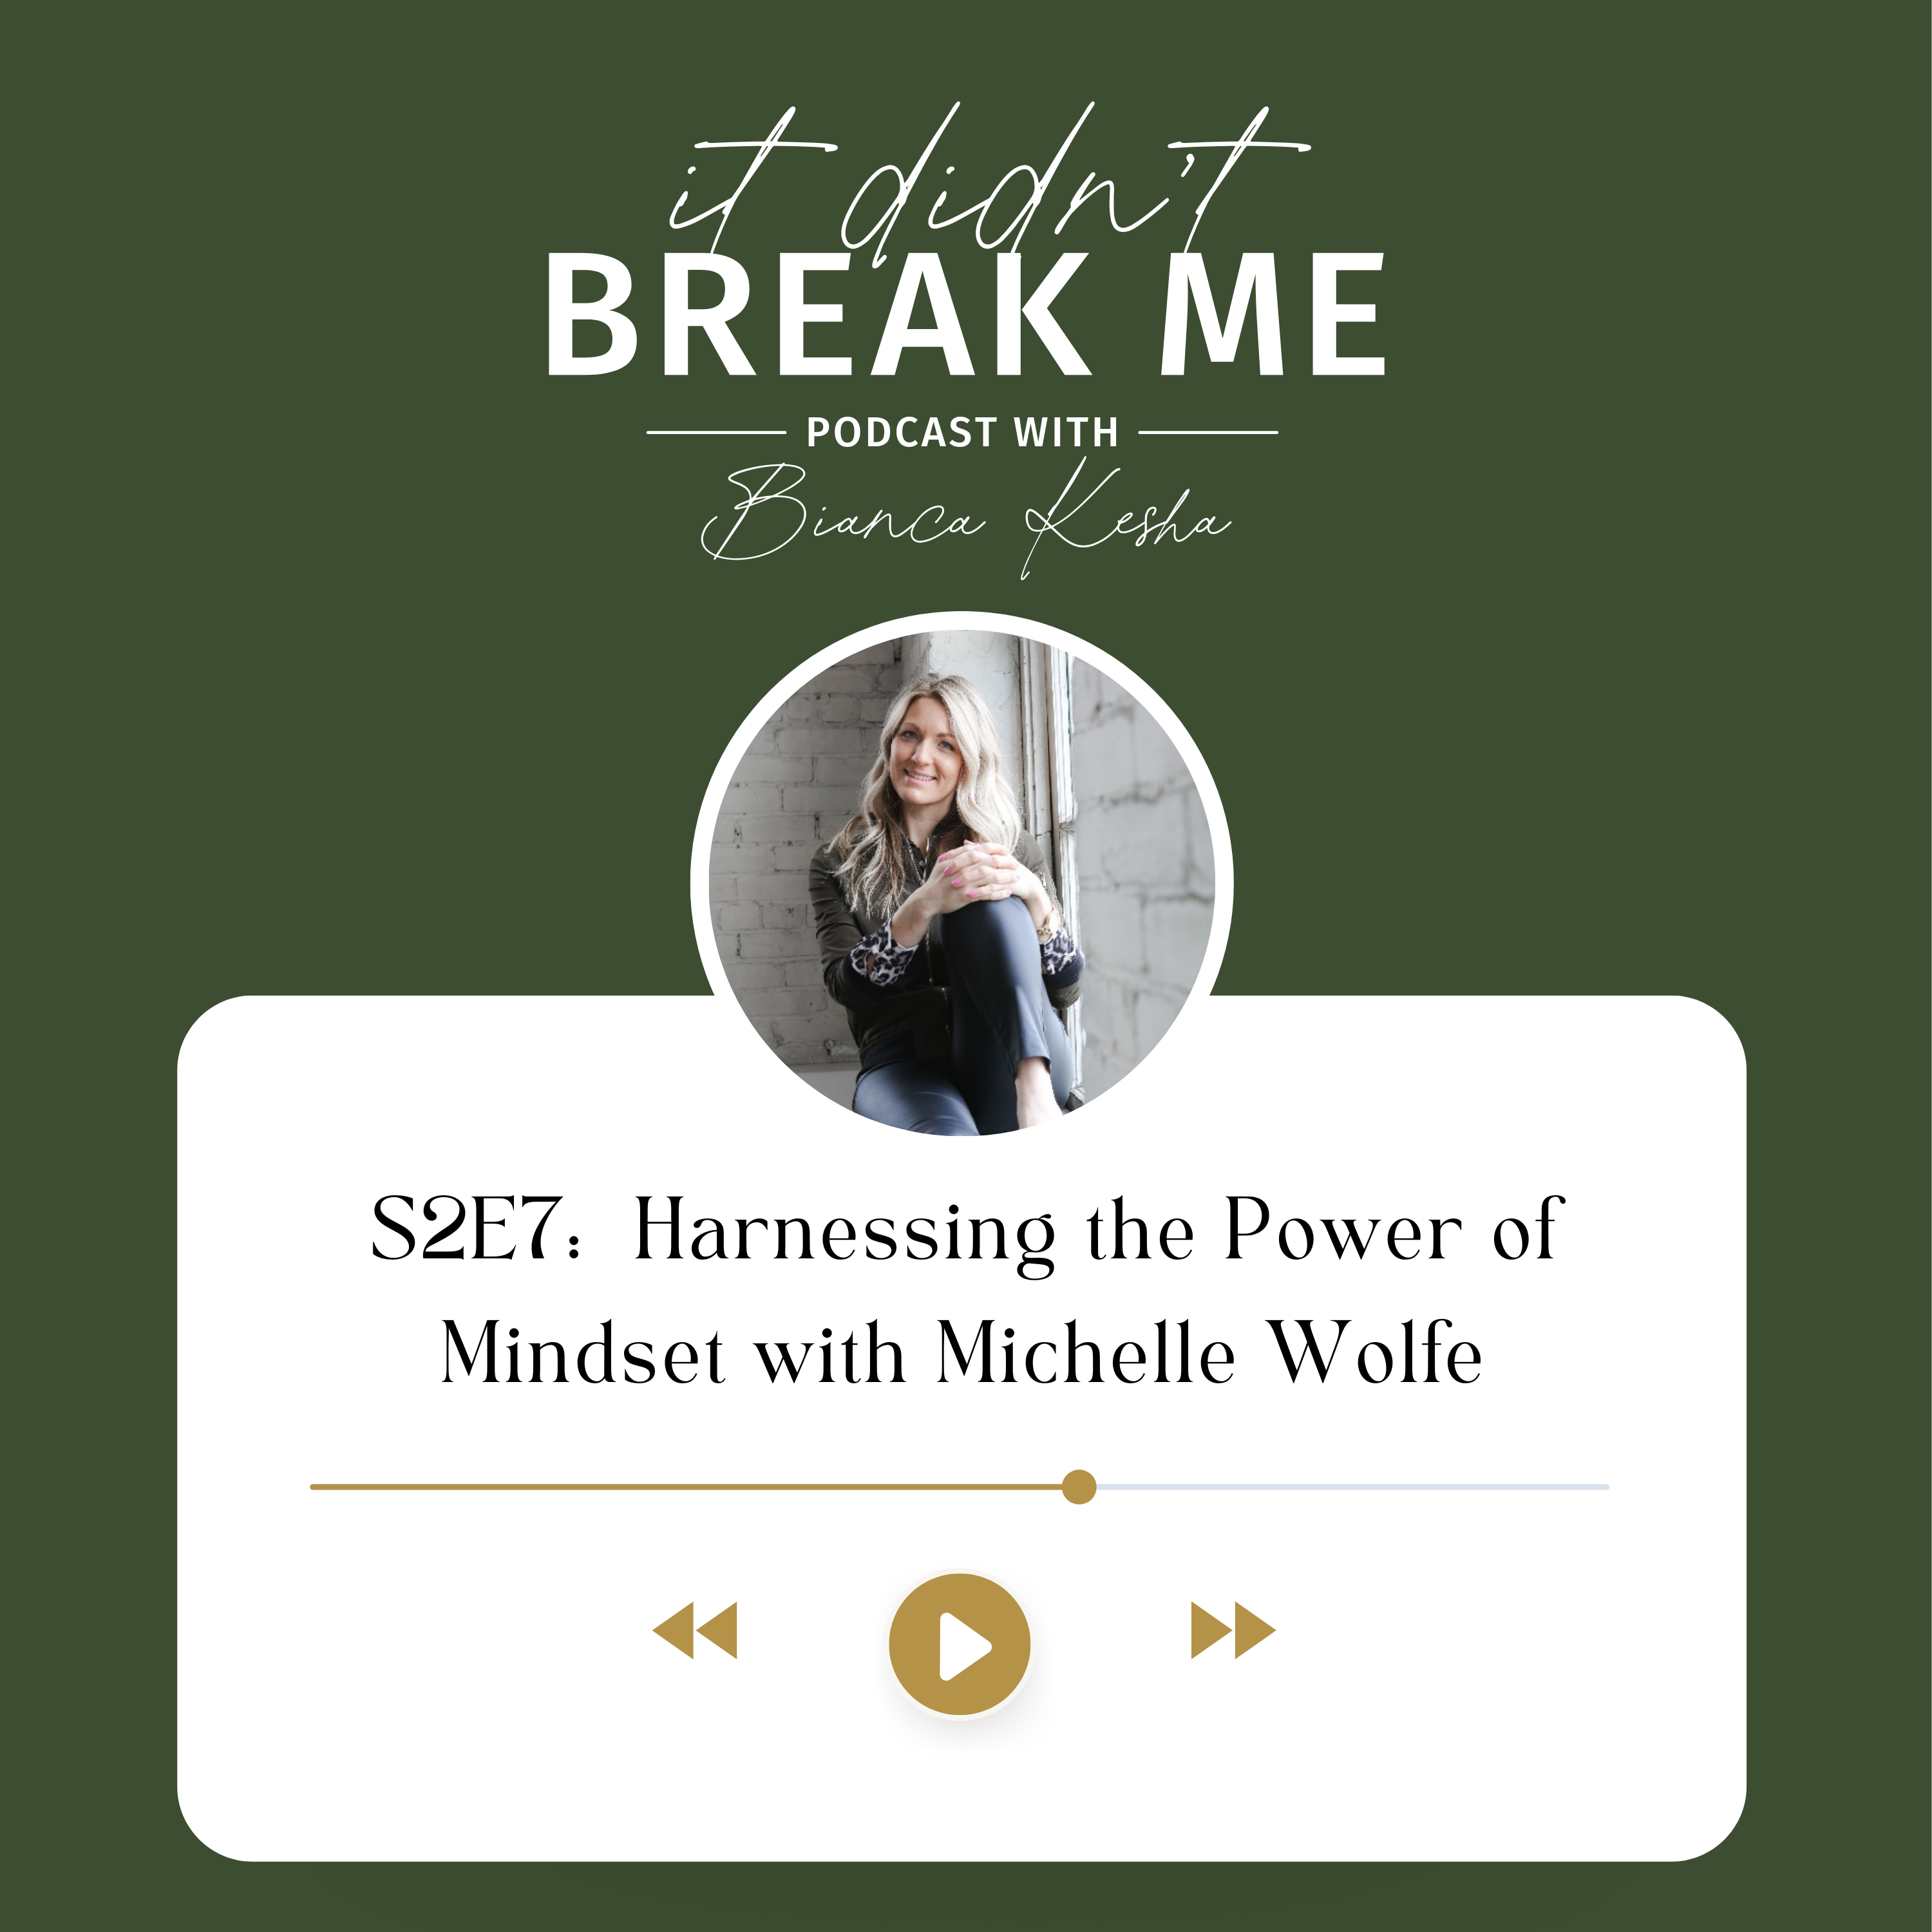 Harnessing the Power of Mindset with Michelle Wolfe Image